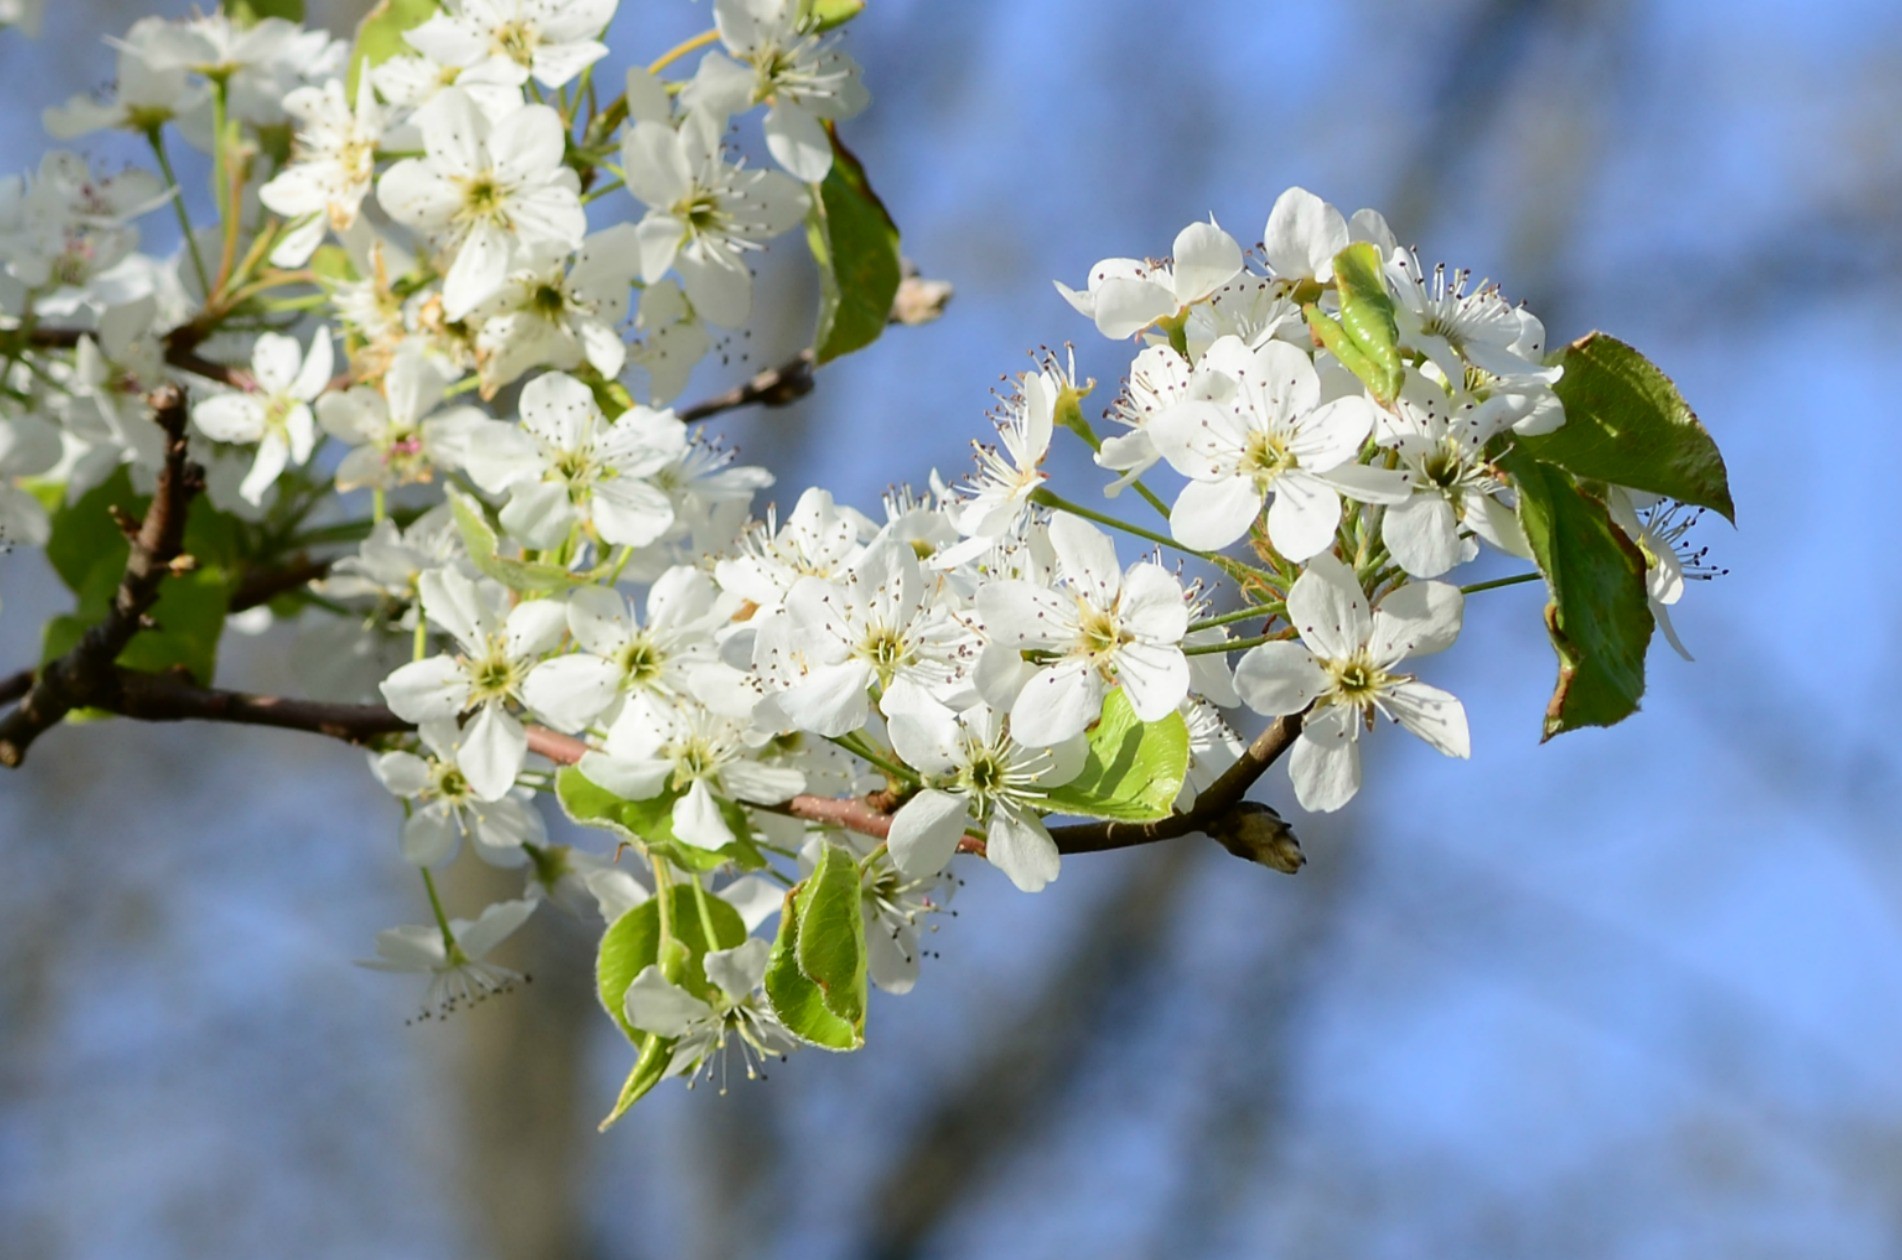 A close-up of white blossoms on a tree.